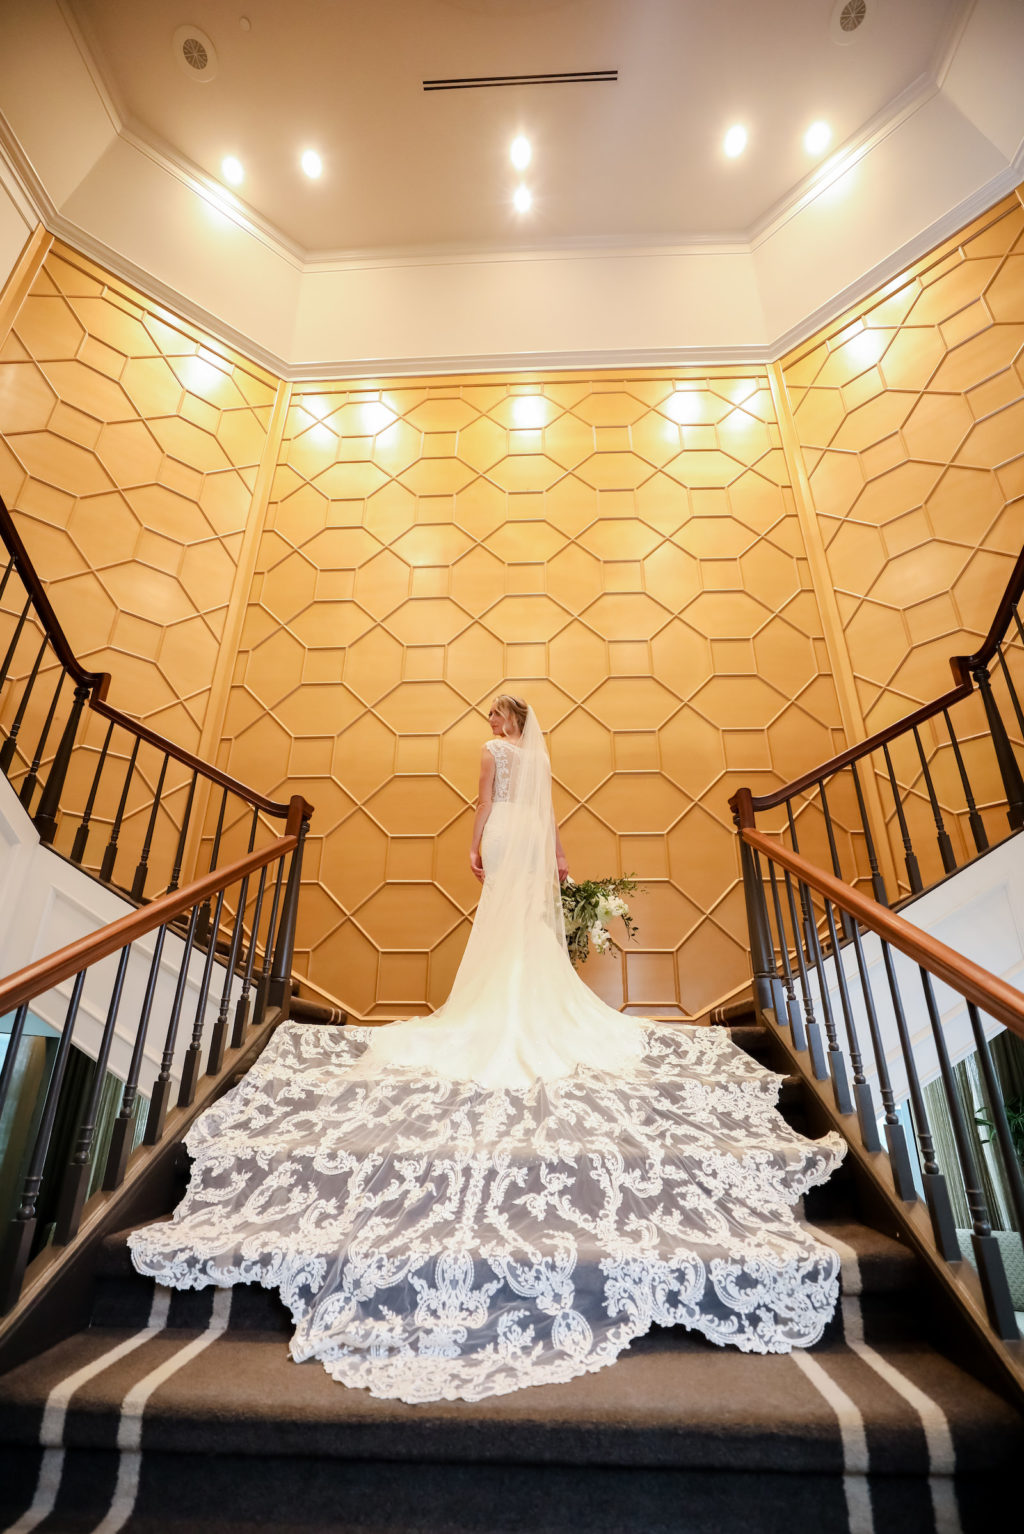 Bride in Romantic Lace and Illusion Overlay and Long Train, Full Length Veil Holding White and Greenery Floral Bouquet on Staircase | Wedding Venue The Tampa Club | Wedding Dress Truly Forever Bridal | Wedding Photographer Lifelong Photography Studio | Styled Shoot